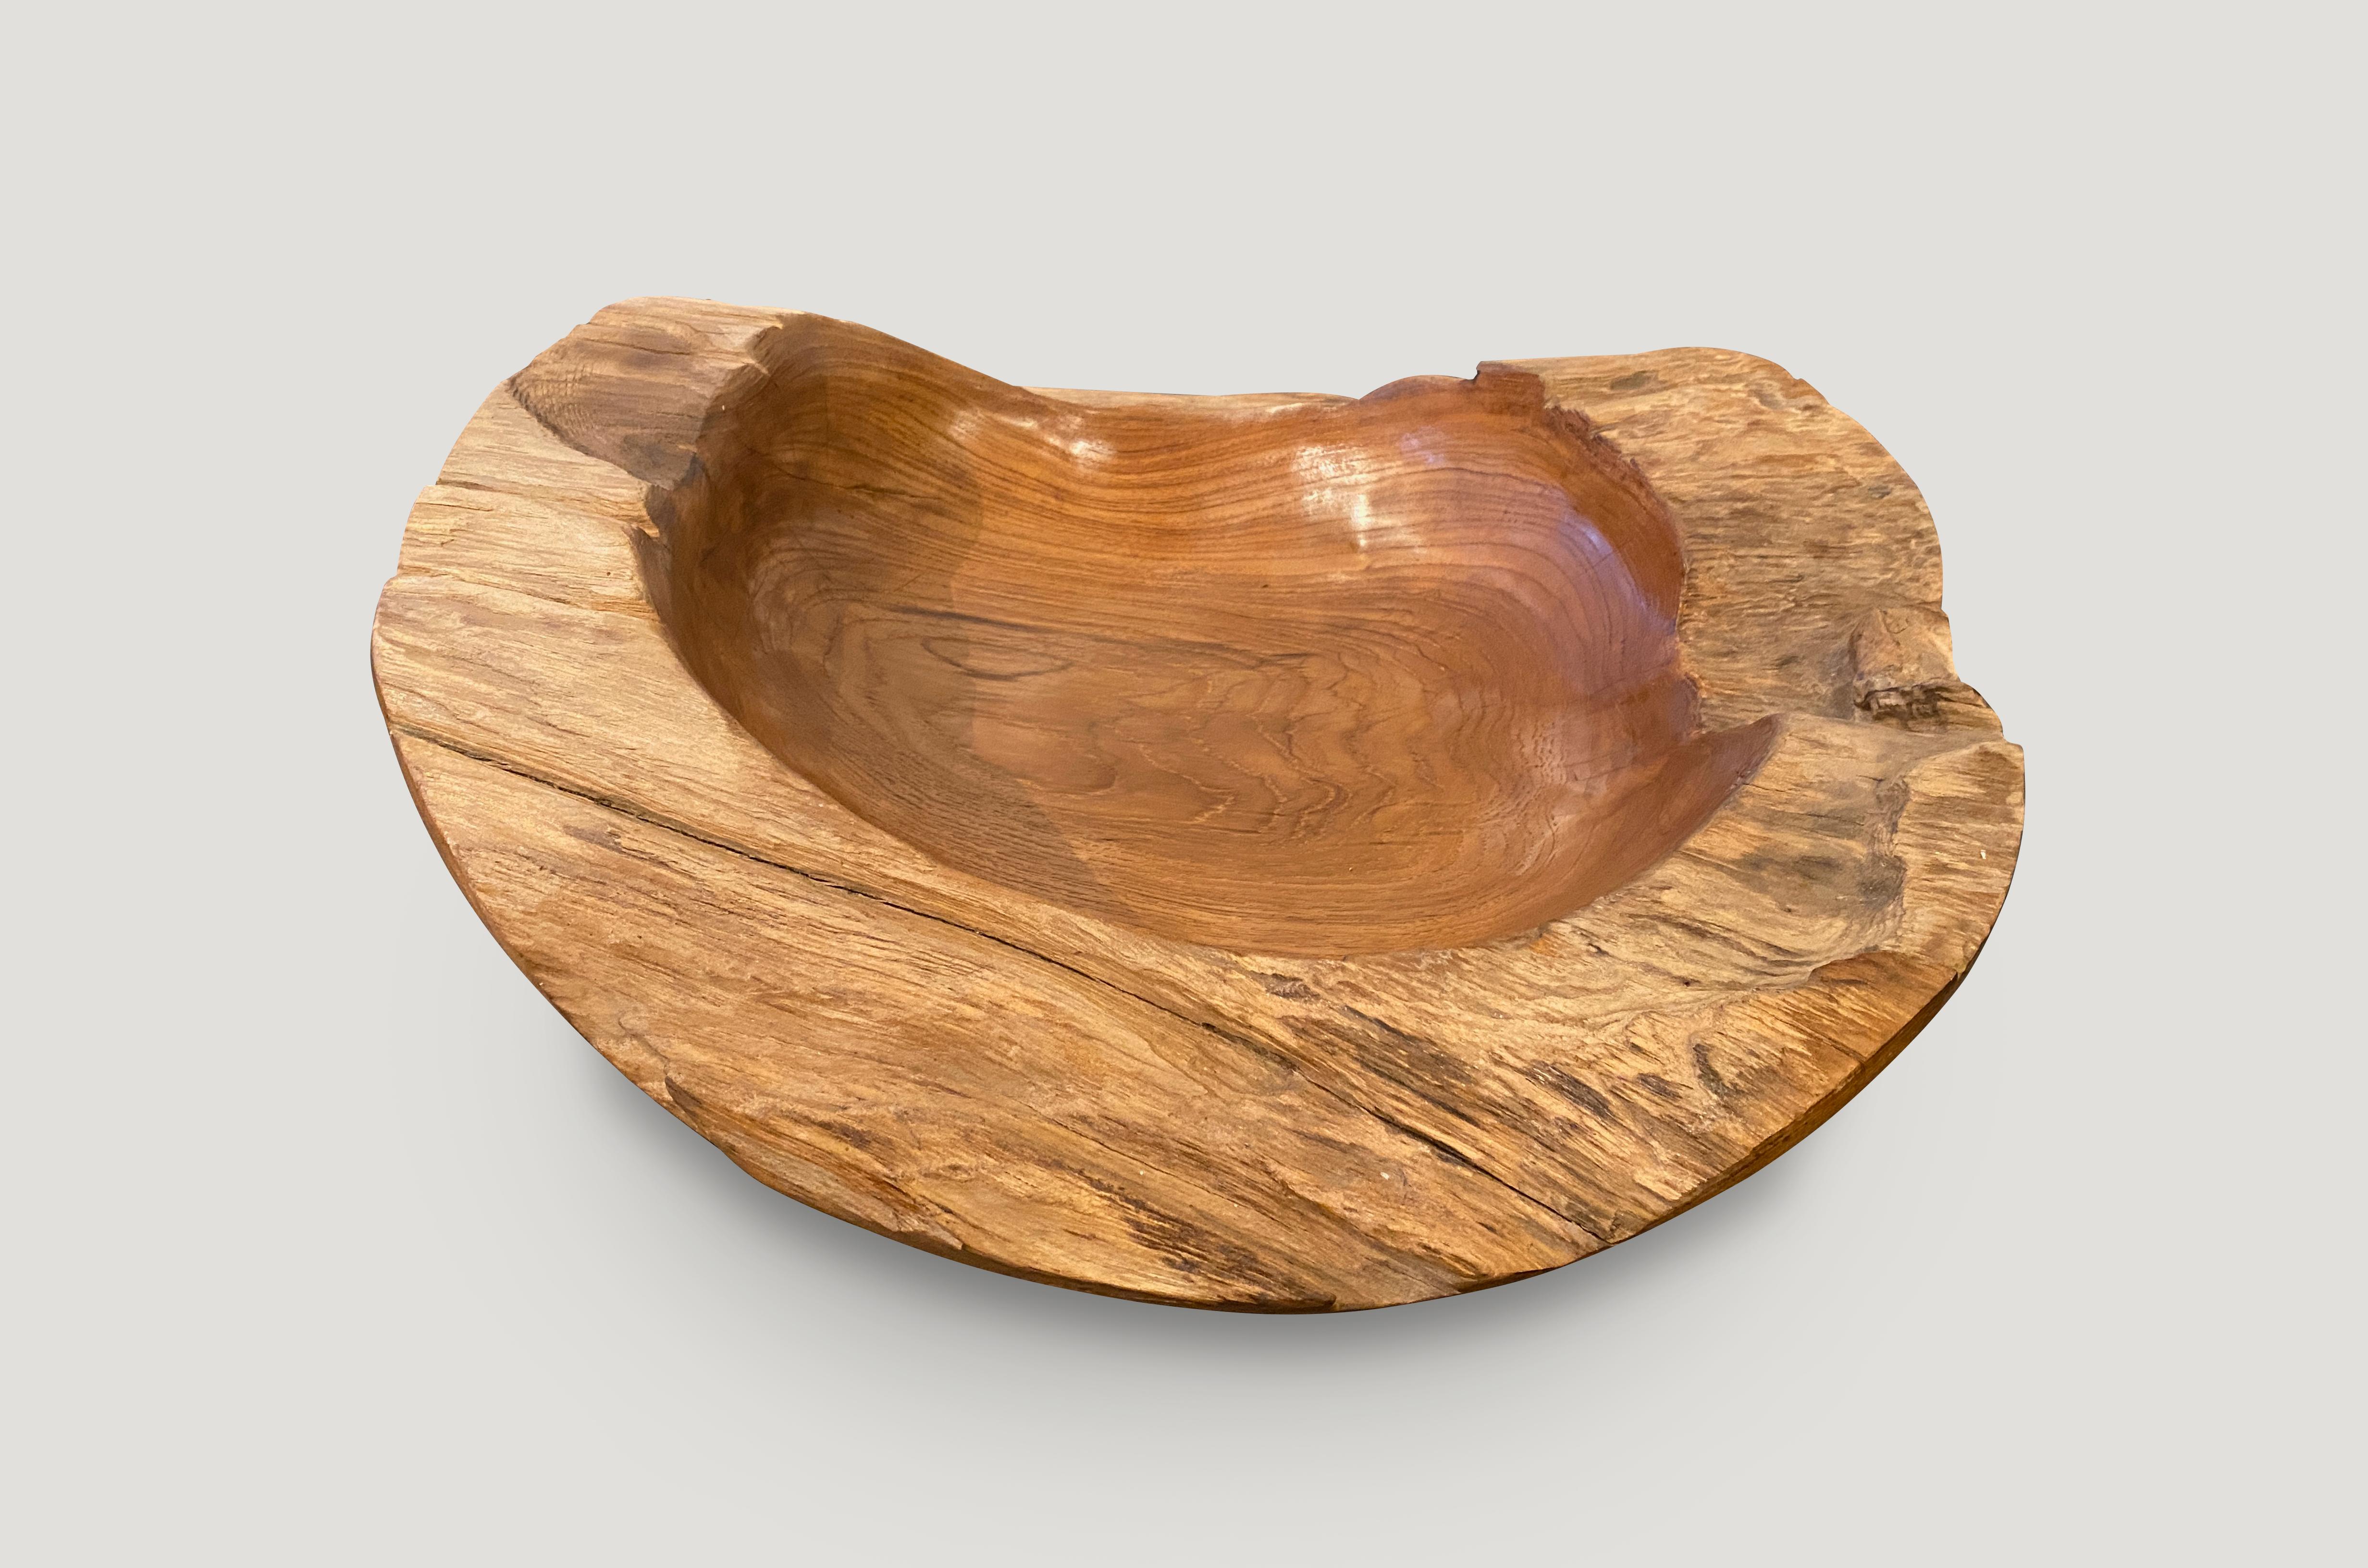 This organic teak vessel serves as a stunning sculptural piece and a practical solution to hold fruit, magazines, towels, etc. We left the sides raw in contrast. Organic is the new modern.

Own an Andrianna Shamaris original.

Andrianna Shamaris.